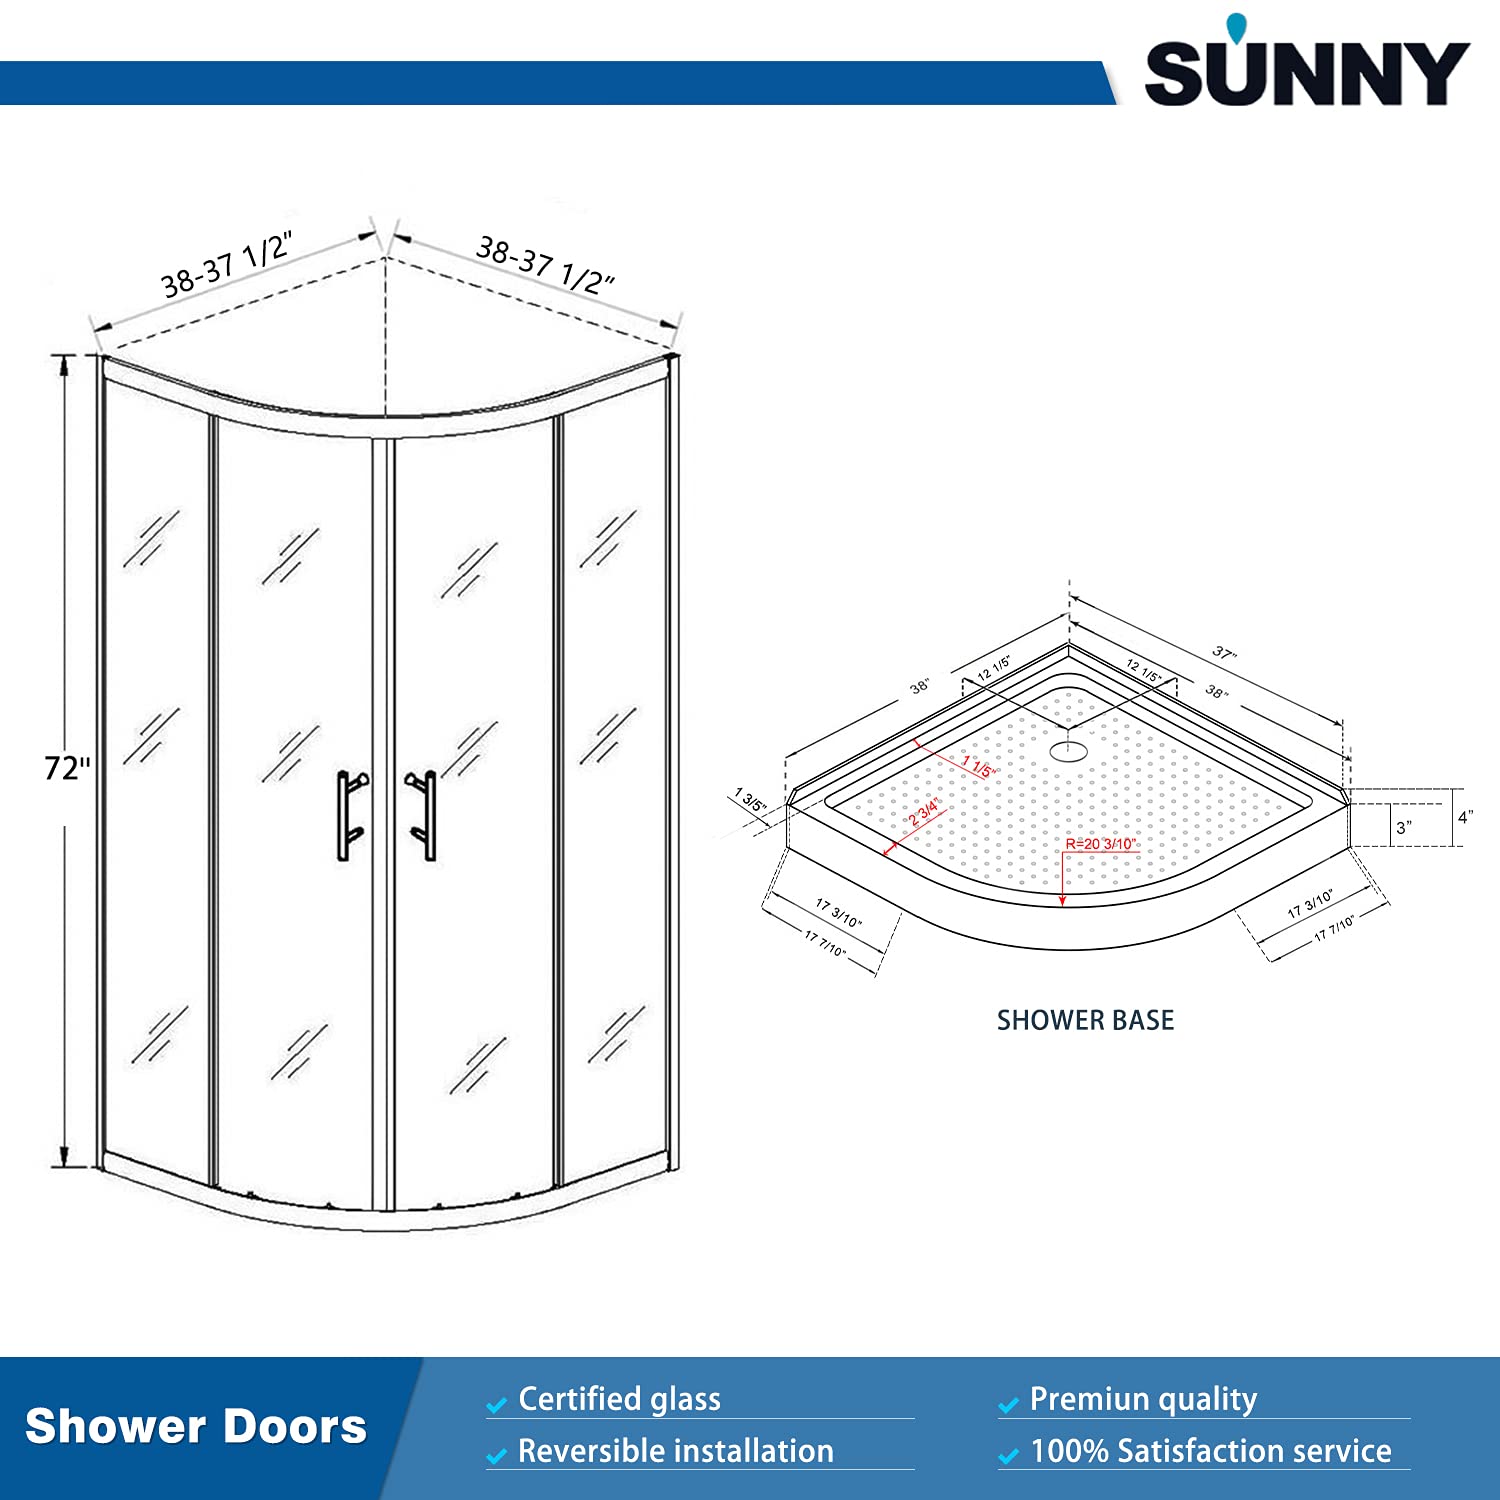 SUNNY SHOWER 37.5 in. D x 37.5 in. W x 72 in. H Chrome Finish Quadrant Enclosures With Sliding Doors And White Quadrant Base Dimensions- SUNNY SHOWER